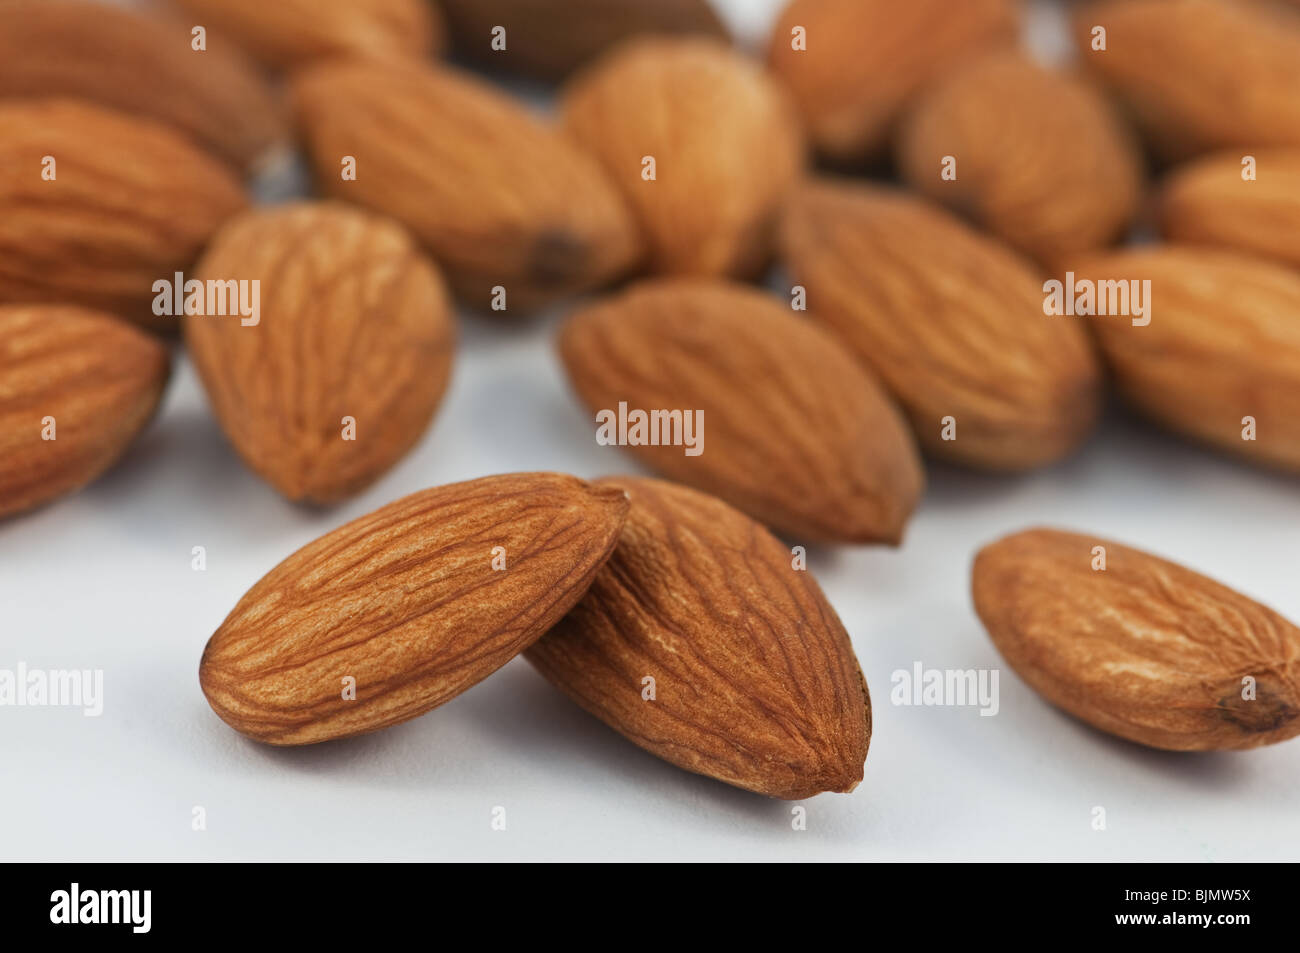 stack of almond close up Stock Photo